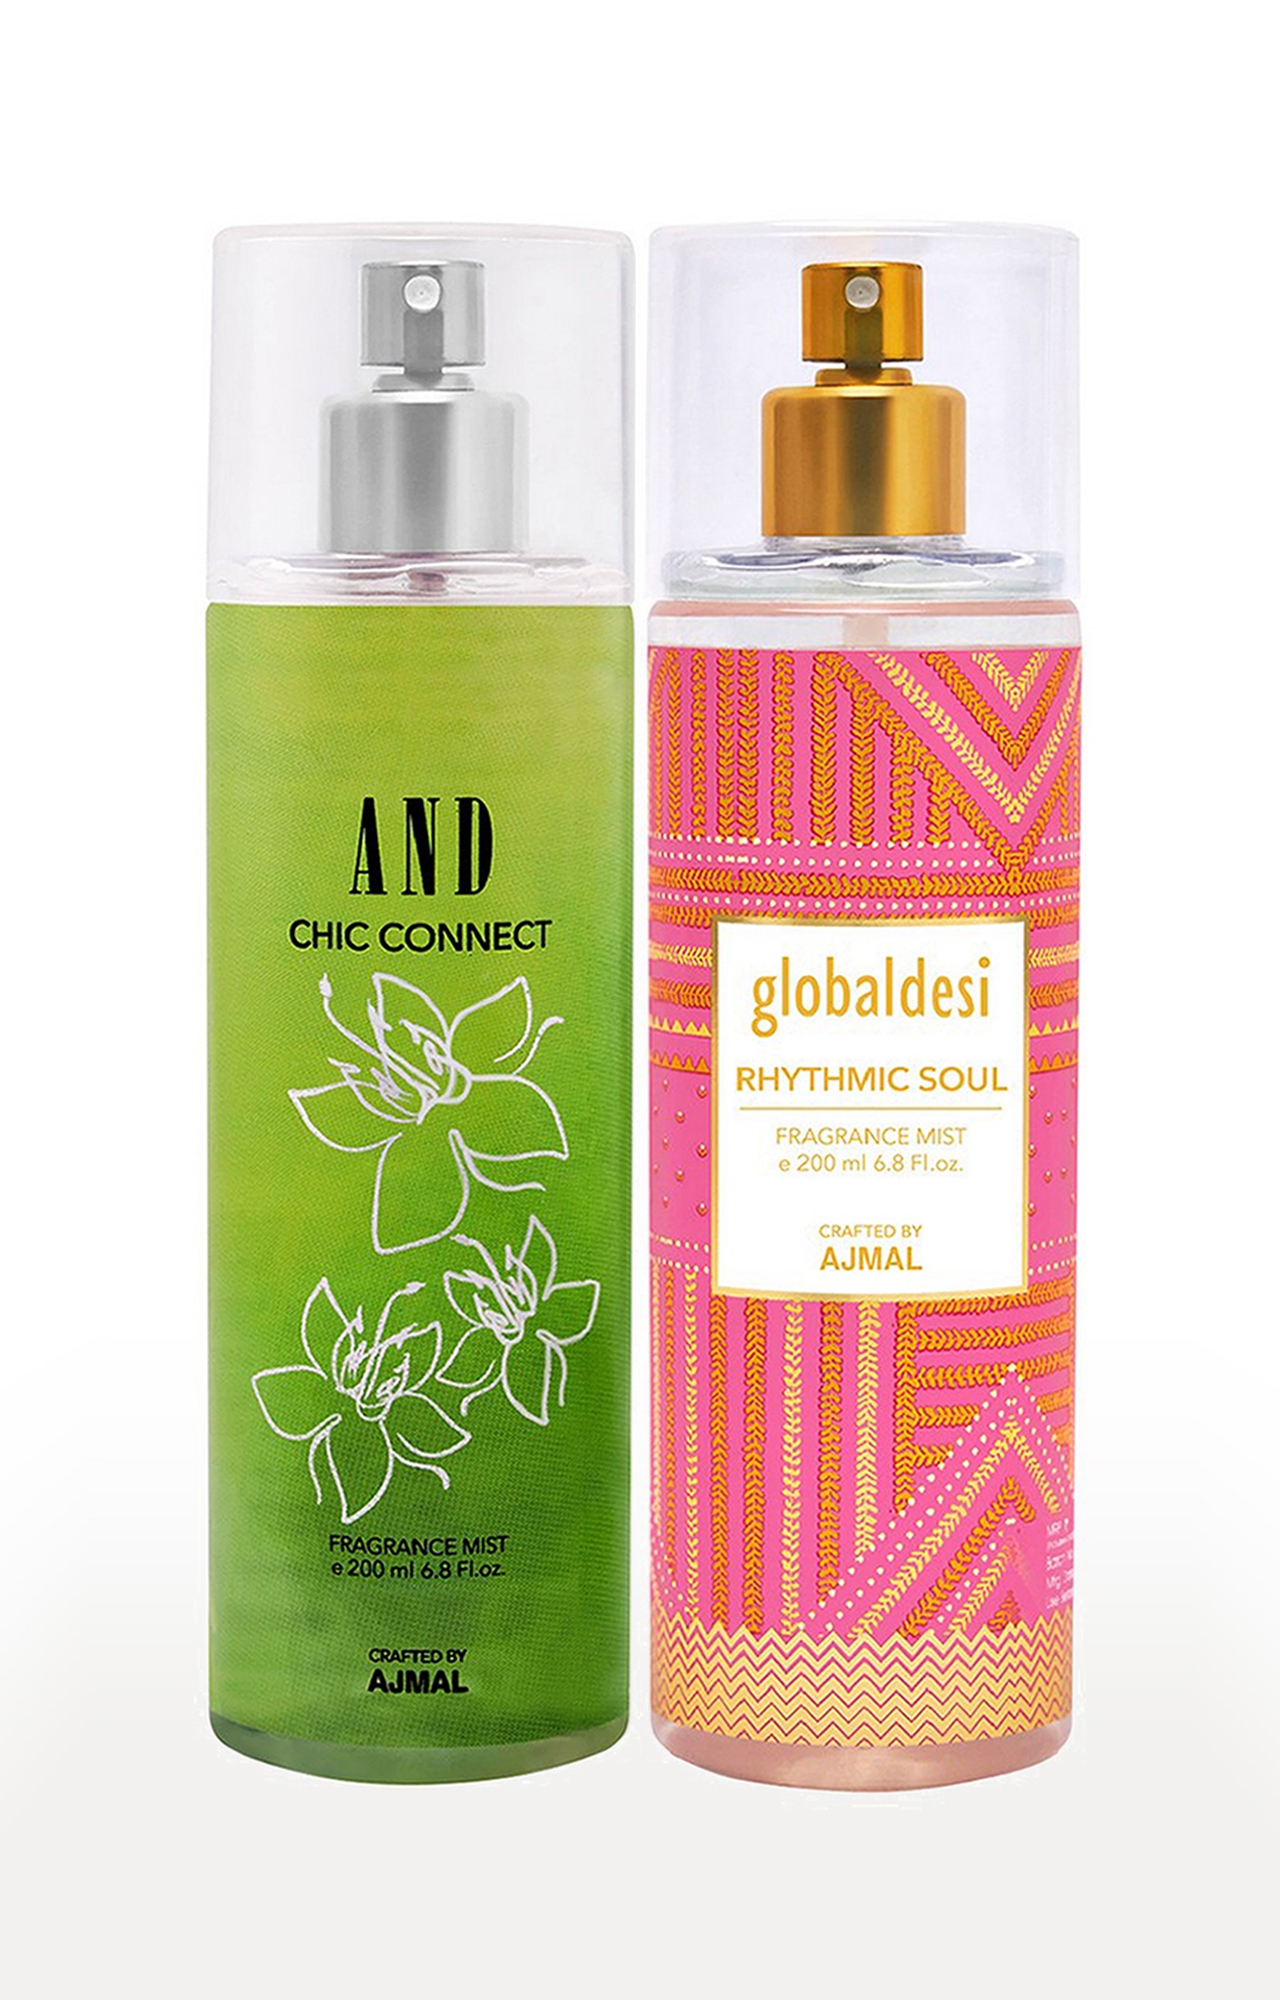 AND Crafted By Ajmal | AND Chi Connect Body Mist 200ML & Global Desi Rhythmic Soul Body Mist 200ML Long Lasting Scent Spray Gift For Women Perfume FREE